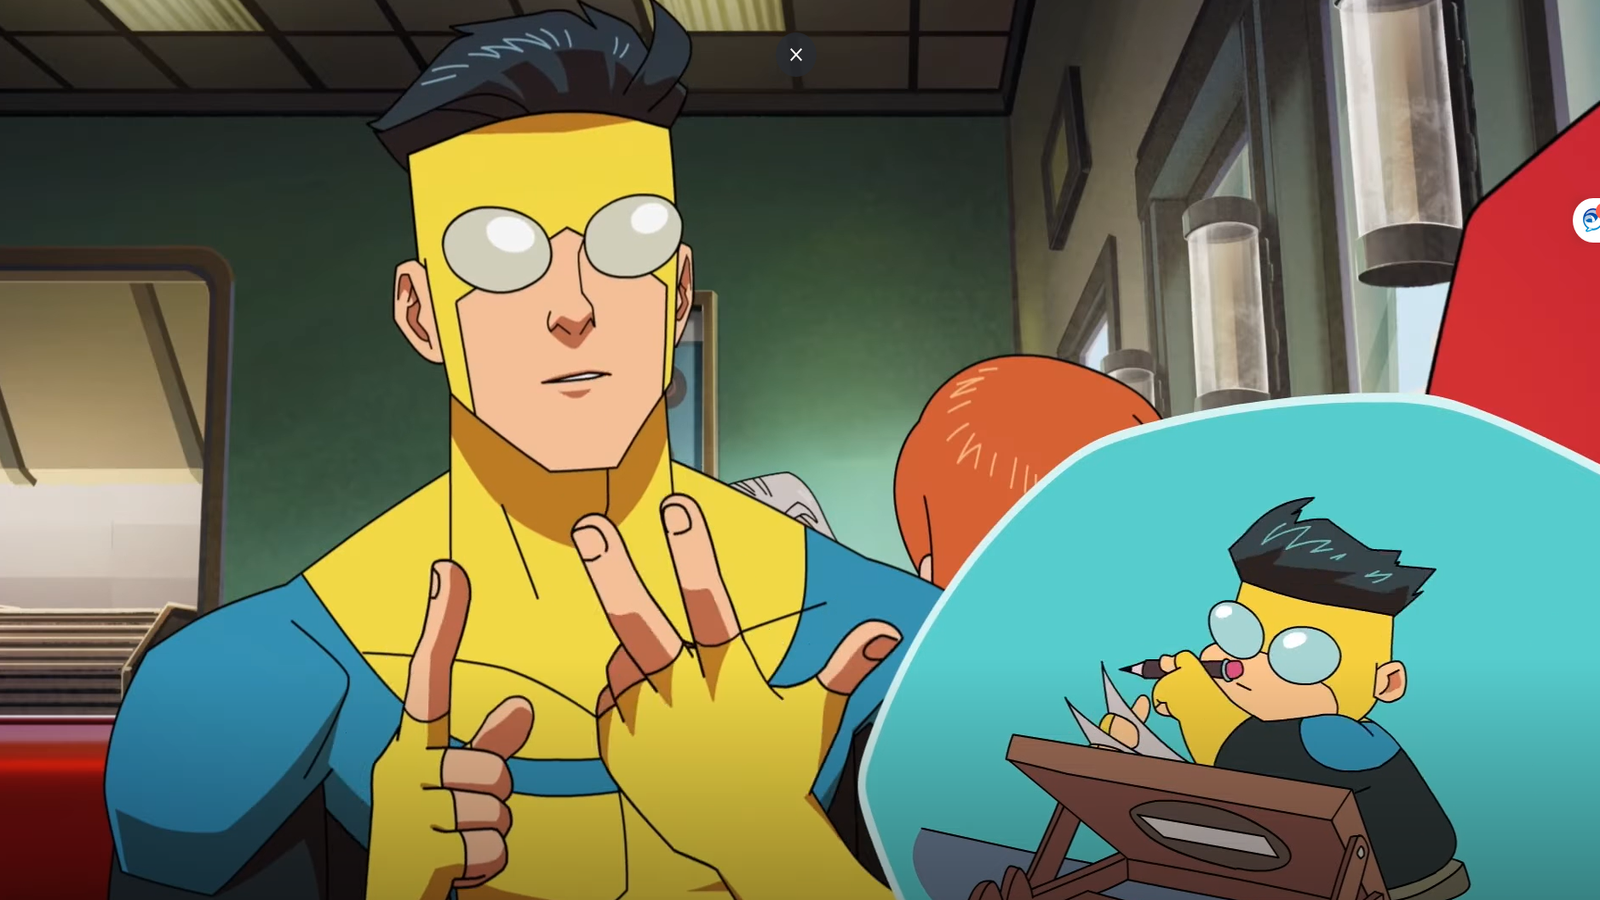 Invincible Season 2: Release Date, Trailer & Everything We Know